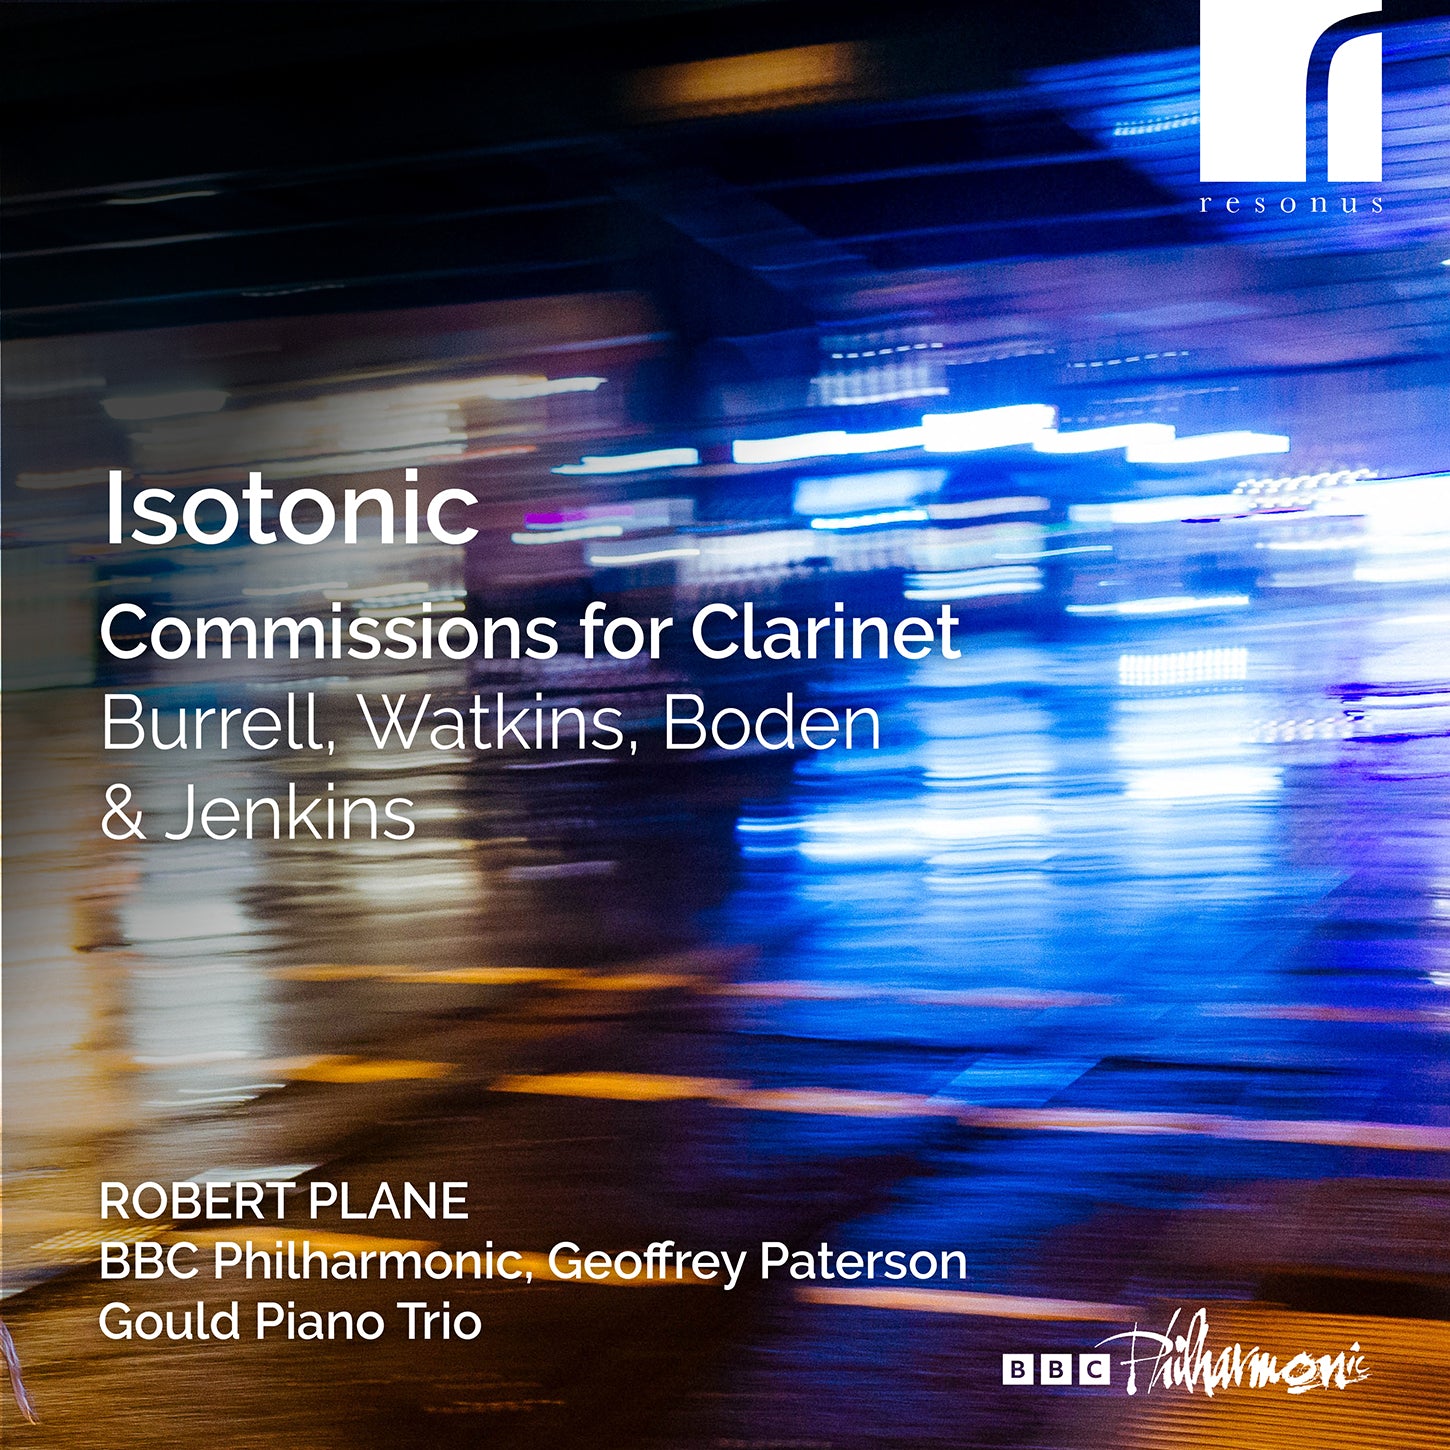 Isotonic - Commissions for Clarinet / Plane, Paterson, Gould Trio, BBC Philharmonic